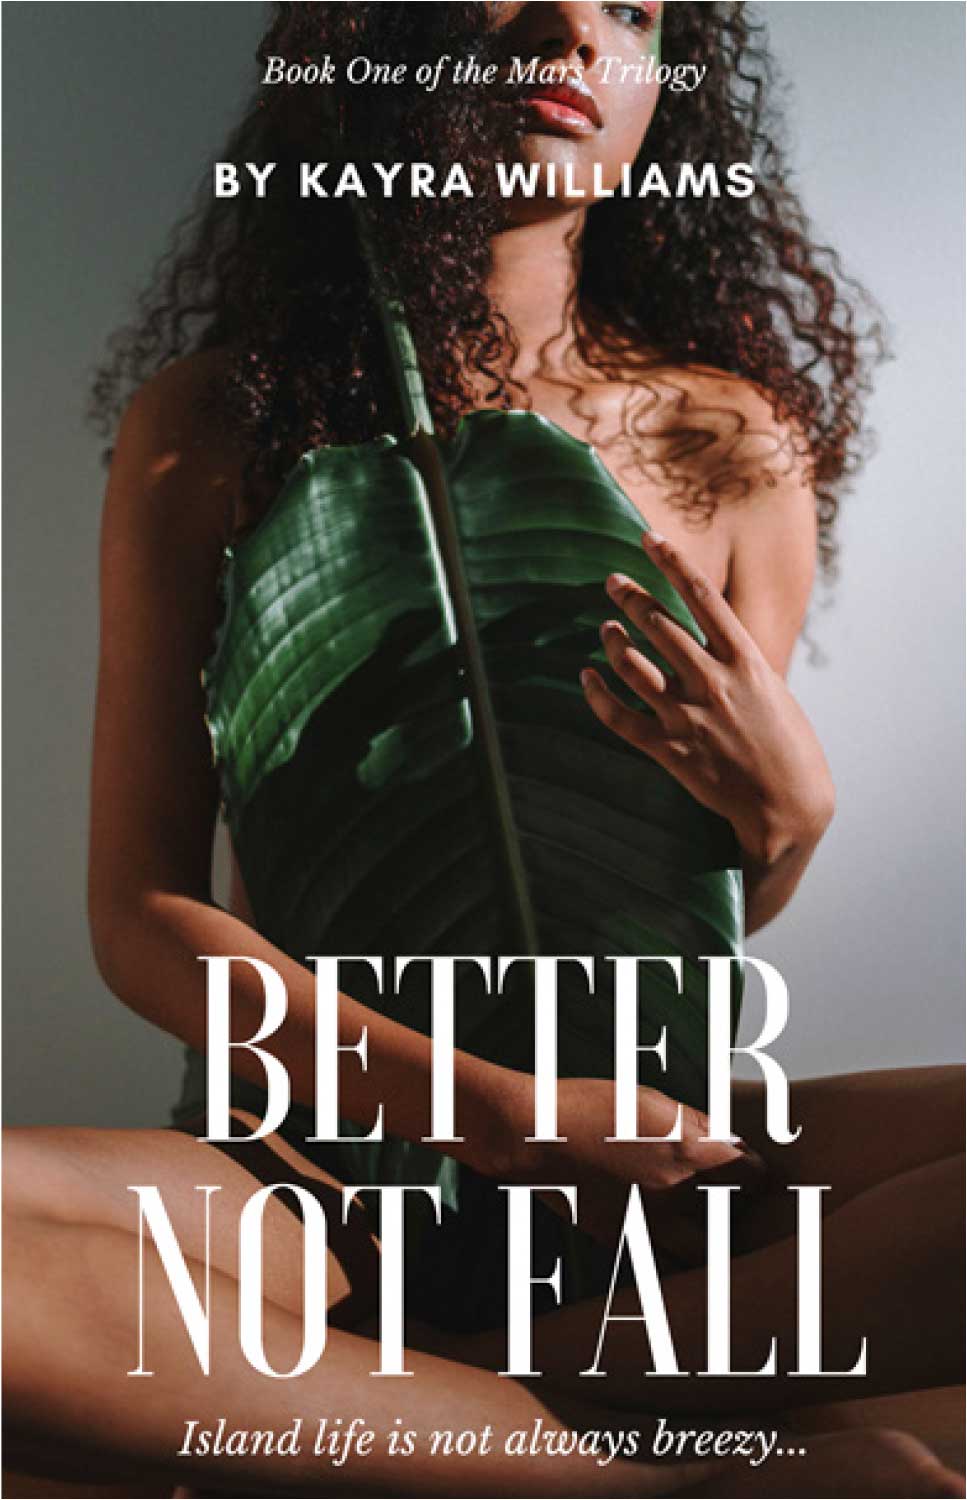 Cover of new Book ‘Better Not Fall’ by Kayra Williams 